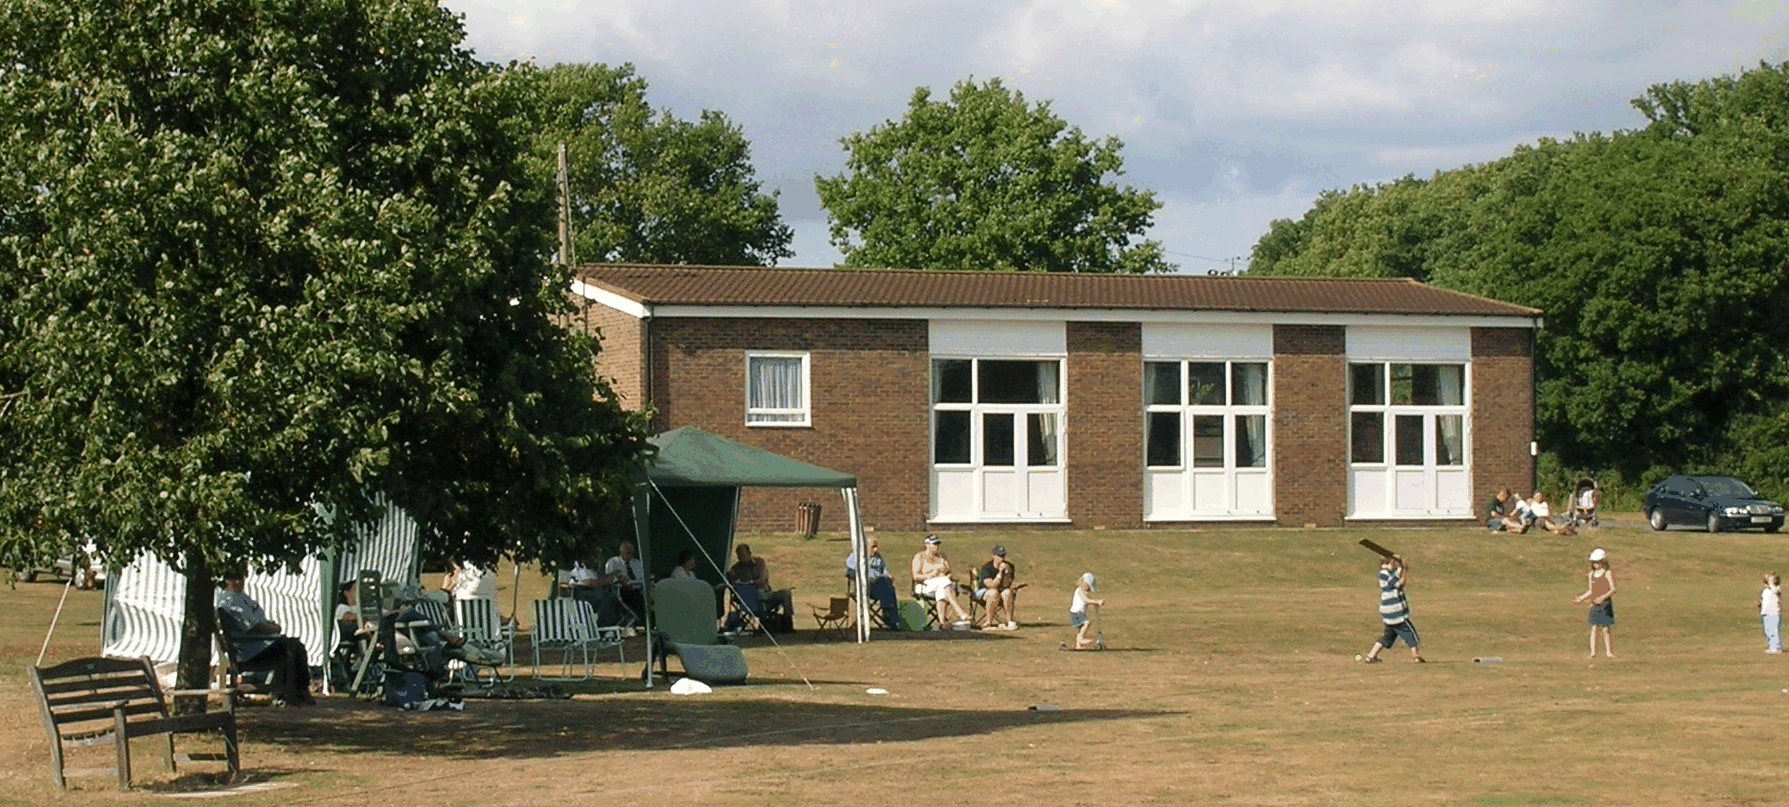 Hall in grounds of recreation ground.gif